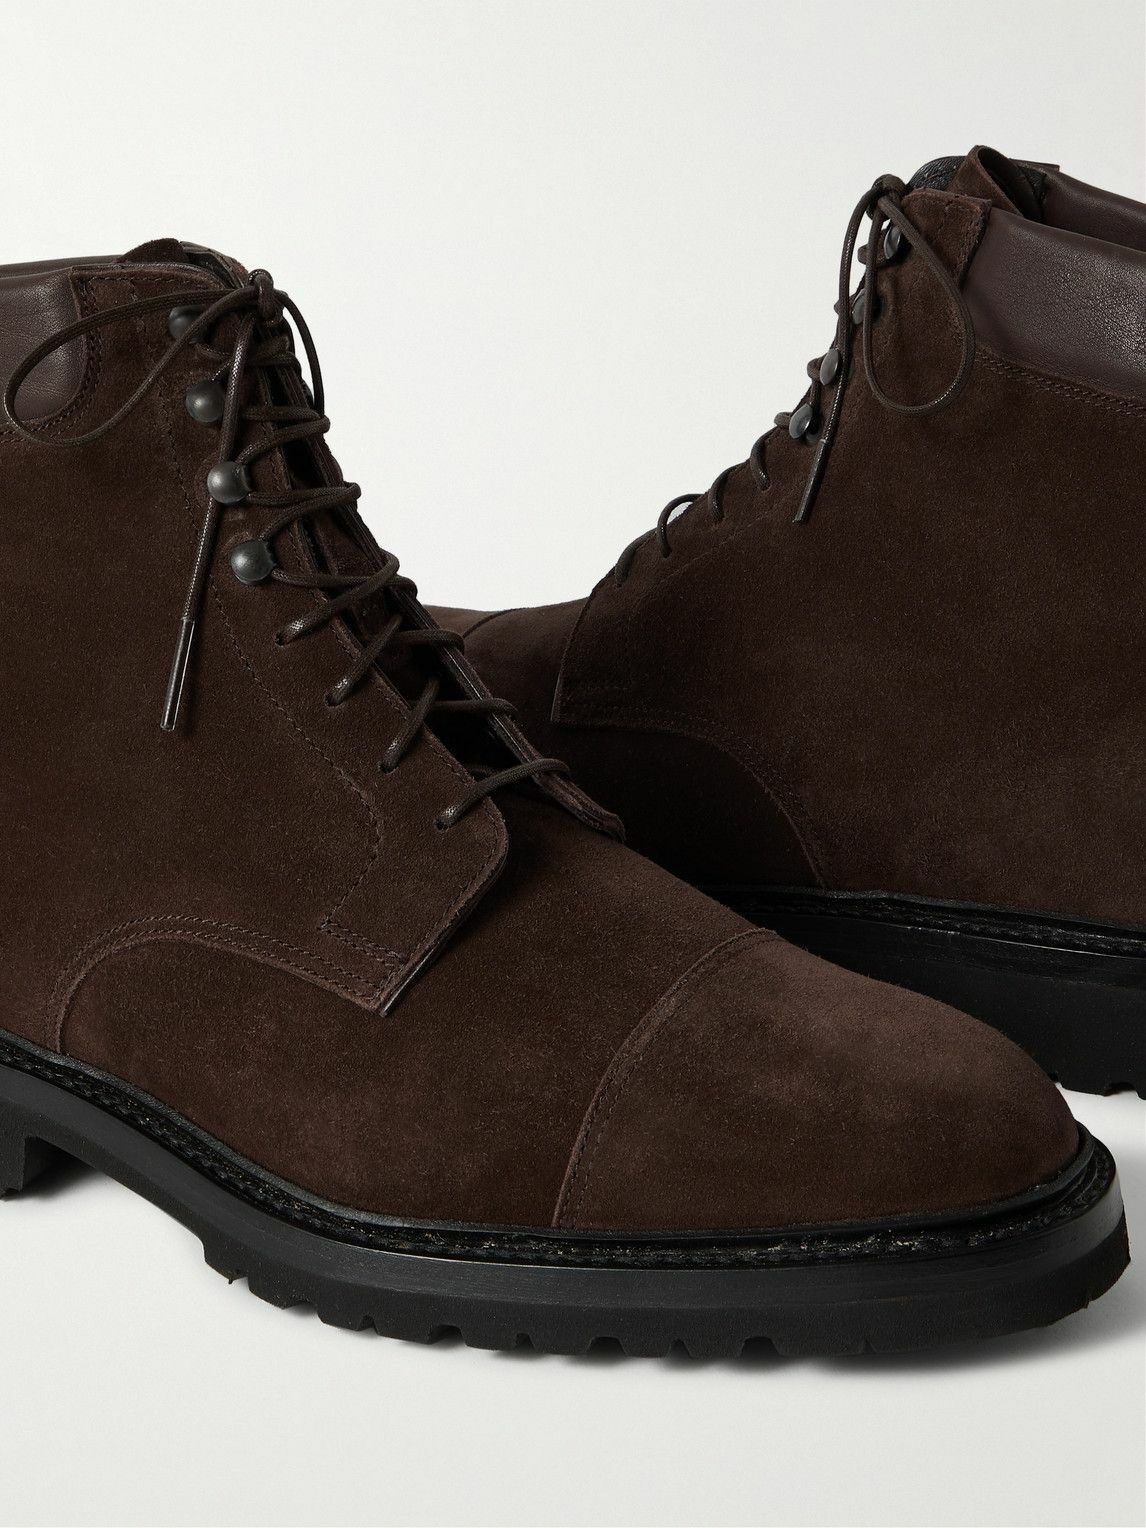 George Cleverley - Taron Leather-Trimmed Suede Boots - Brown George ...